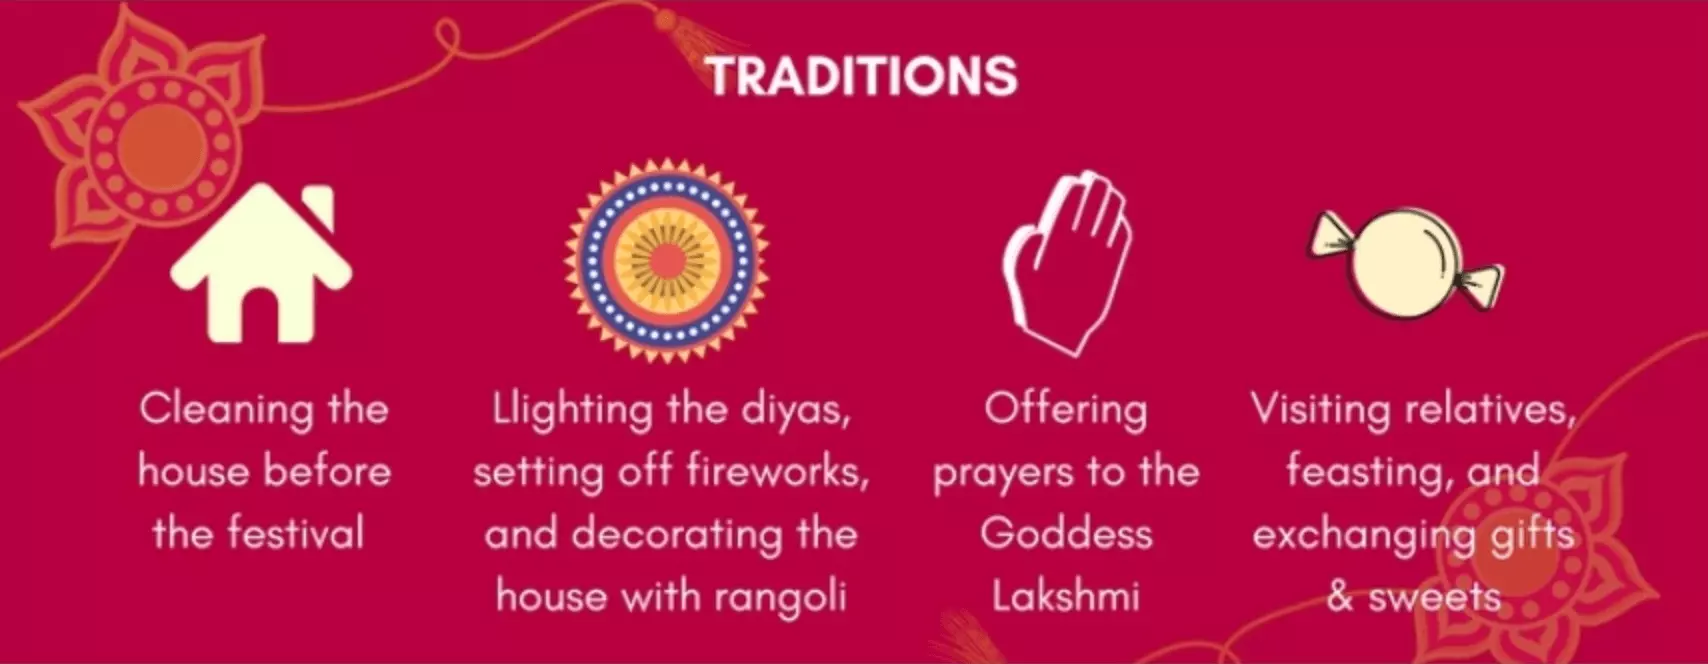 Diwali_Traditions.png